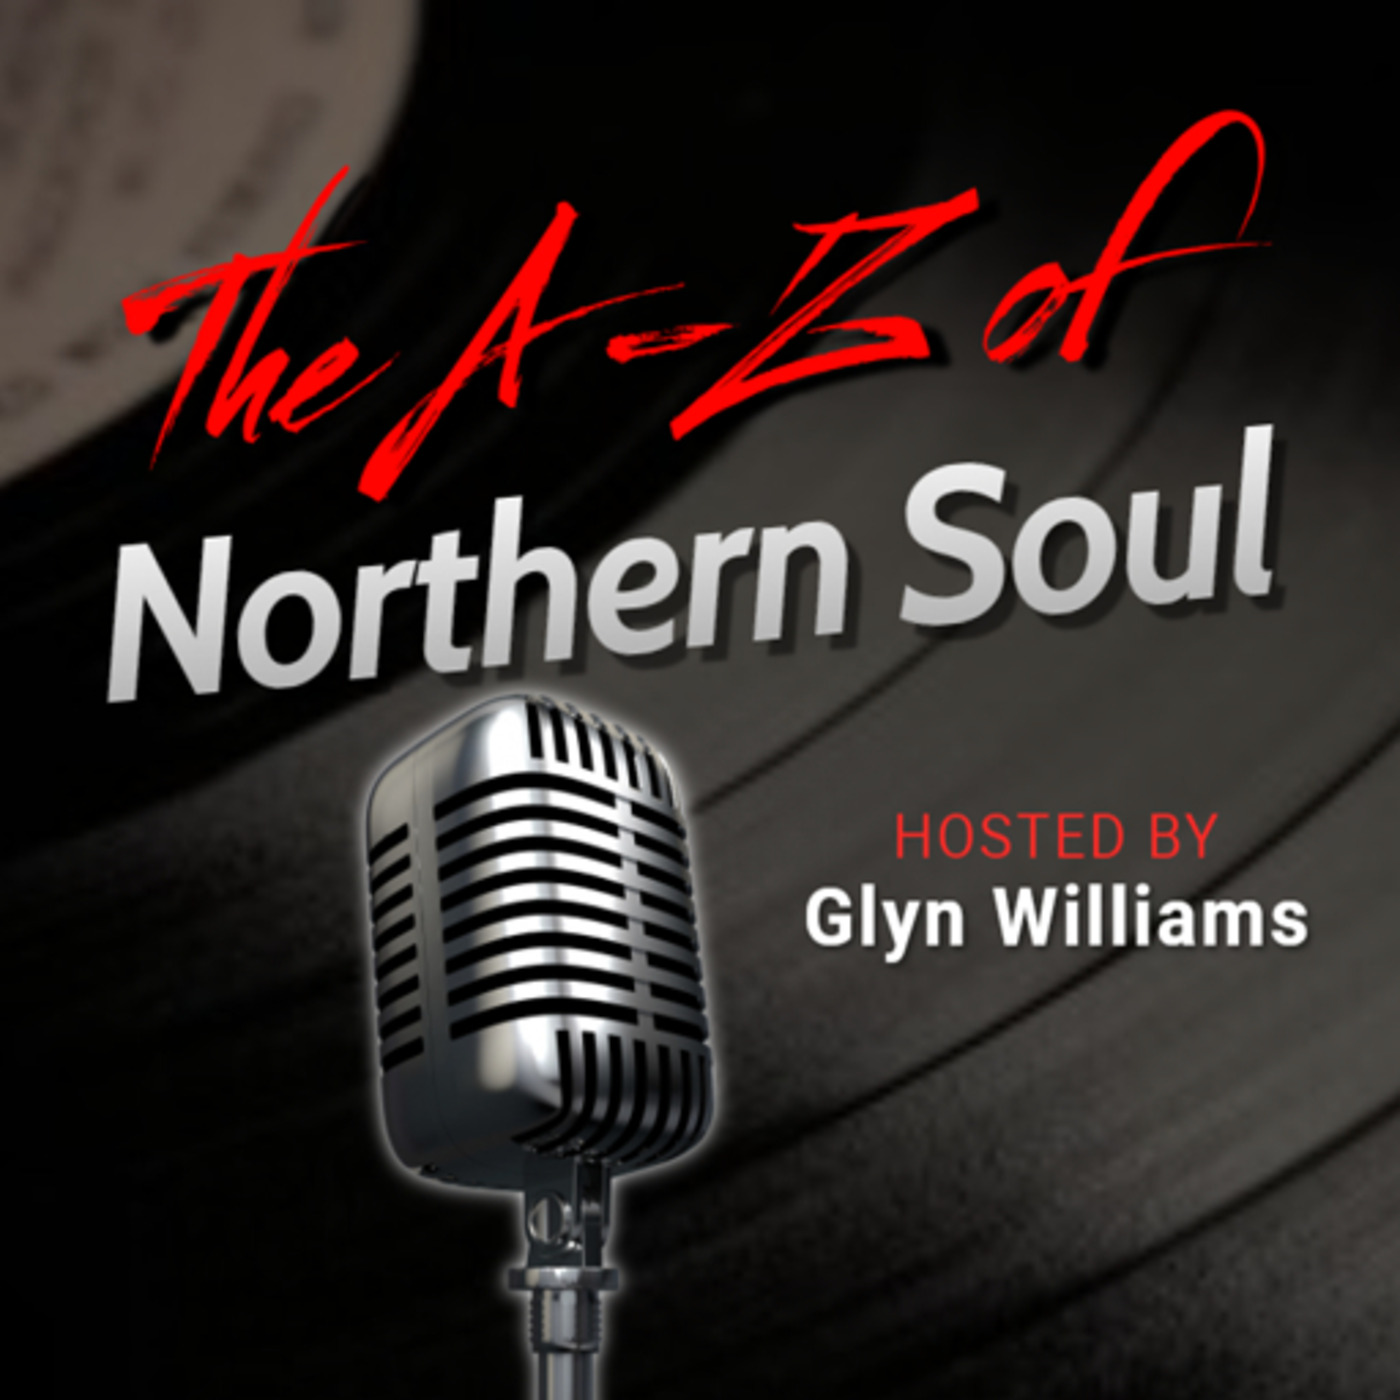 The A-Z of Northern Soul E010